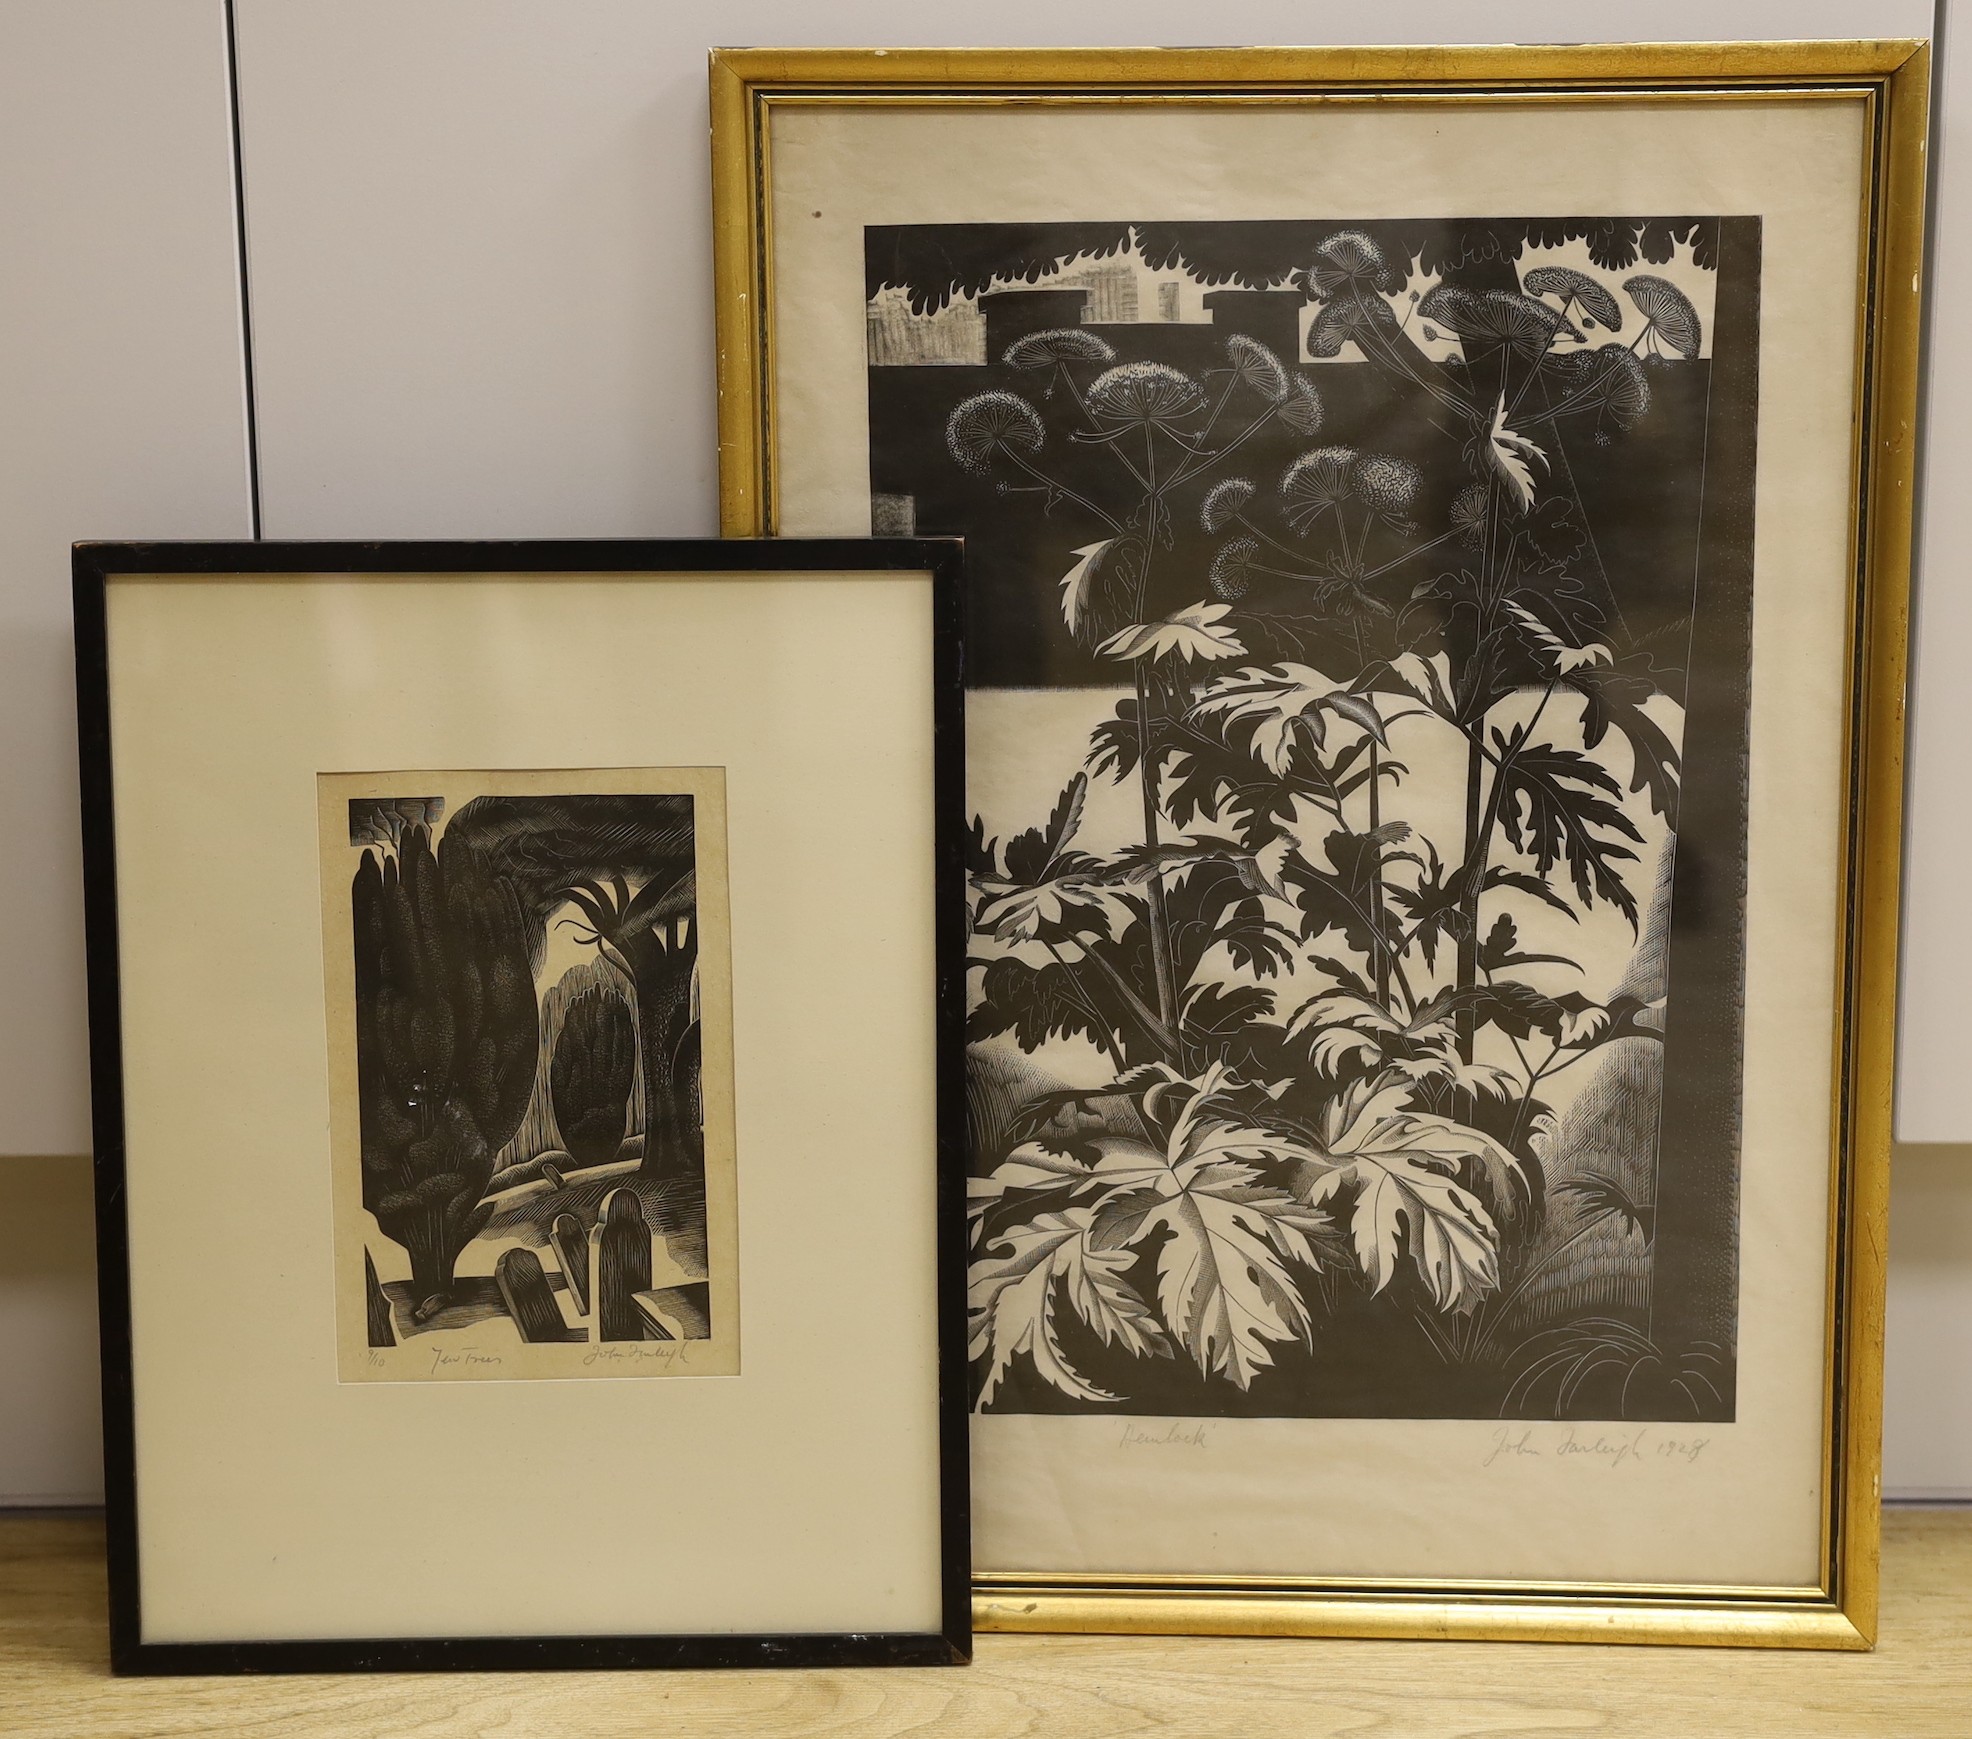 John Farleigh (1900-1965), two wood engravings, ‘Hemlock’ & ‘Yew Trees’, both signed, 7/50 & 9/10, overall 44 x 31cm and 18 x 12cm                                                                                          